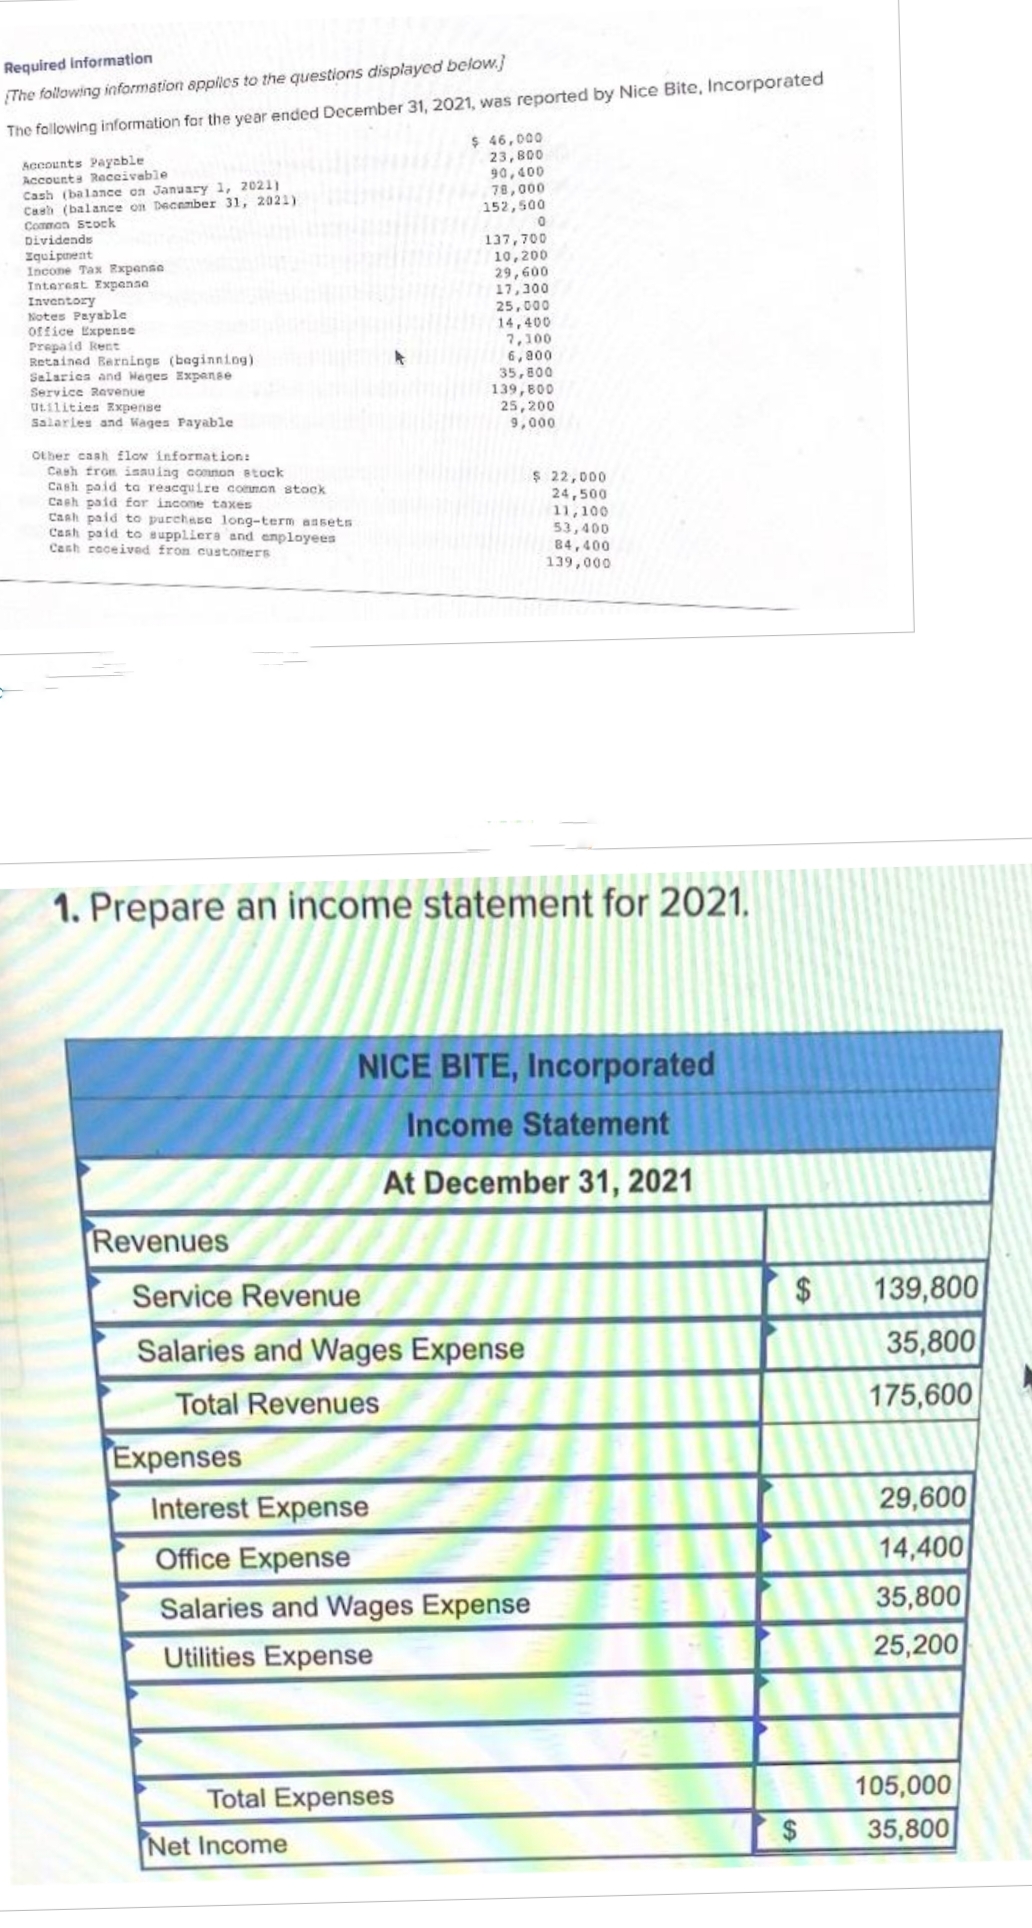 Required information
[The following information applies to the questions displayed below.]
The following information for the year ended December 31, 2021, was reported by Nice Bite, Incorporated
Accounts Payable
Accounts Receivable
Cash (balance on January 1, 2021)
Cash (balance on December 31, 2021)
Common Stock
Dividends
Equipment
Income Tax Expense
Interest Expense
Inventory
Notes Payable
office Expense
Prepaid Rent
Retained Barnings (beginning)
Salaries and Hages Expanse
Service Revenue
Utilities Expense
Salaries and Wages Payable
Other cash flow information:
Cash from issuing connon stock
Cash paid to reacquire common stock
Cash paid for income taxes
cash paid to purchase long-term assets
Cash paid to suppliers and employees
Cash received from customers
Revenues
Expenses
$ 46,000
23,800
90,400
78,000
152,500
137,700
10,200
29,600
17,300
25,000
1. Prepare an income statement for 2021.
14,400
7,100
6,800
35,800
139,800
25,200
9,000
Total Expenses
Net Income
Service Revenue
Salaries and Wages Expense
Total Revenues
-
$ 22,000
24,500
11,100
53,400
84,400
139,000
NICE BITE, Incorporated
Income Statement
At December 31, 2021
Interest Expense
Office Expense
Salaries and Wages Expense
Utilities Expense
$
$
139,800
35,800
175,600
29,600
14,400
35,800
25,200
105,000
35,800